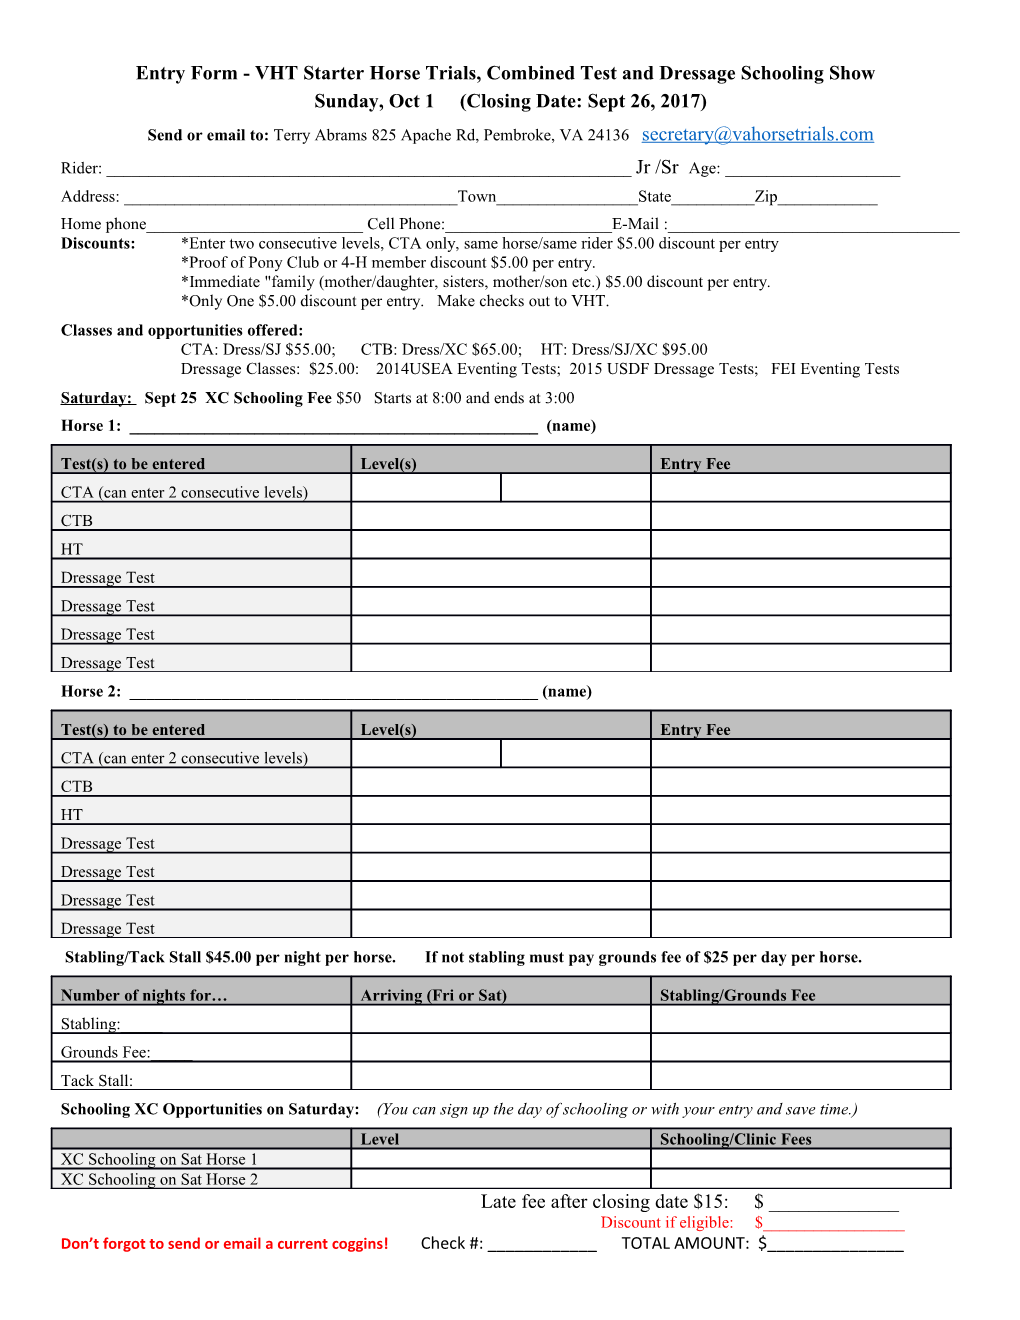 Entry Form - VHT Starter Horse Trials, Combined Test and Dressage Schooling Show